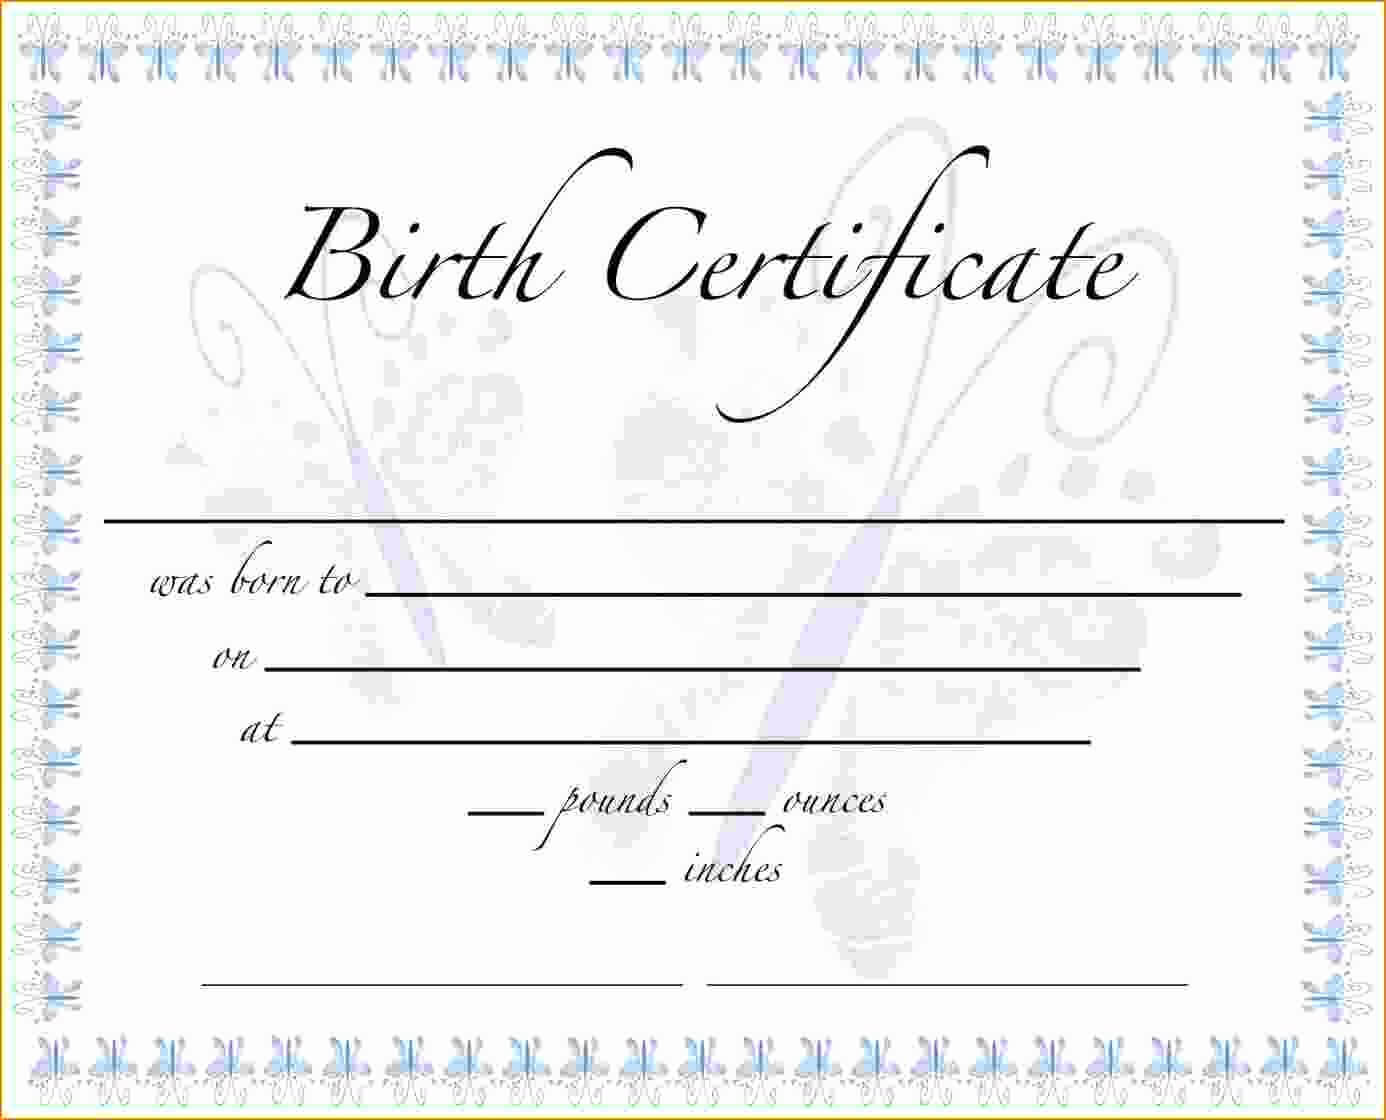 020 Free Birth Certificate Template Ideas Elegant Templates Intended For Birth Certificate Templates For Word